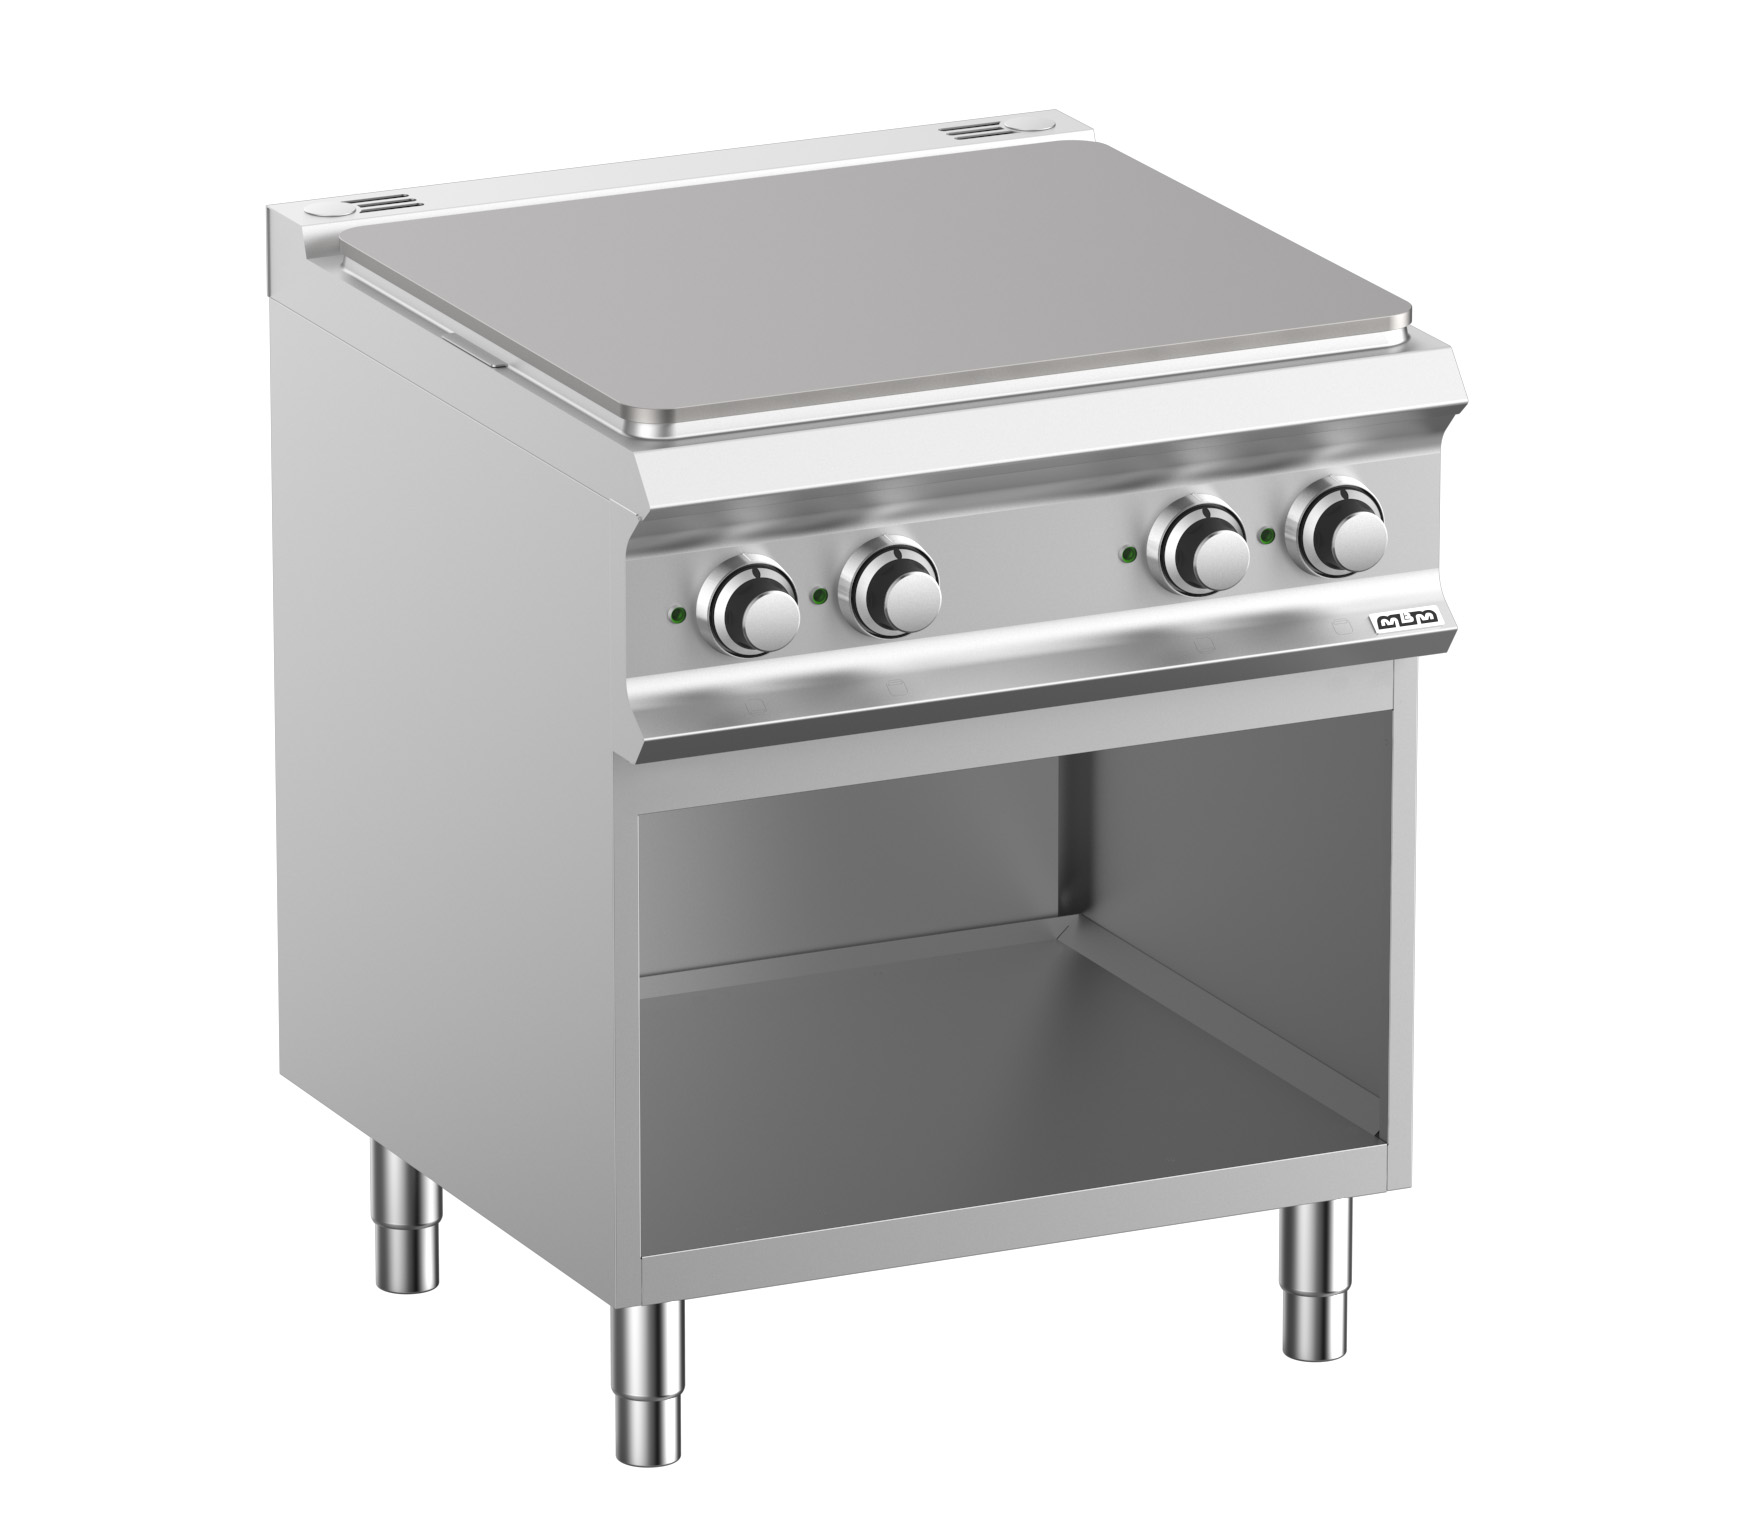 Domina Pro 700 TPE77A Freestanding Electric Cooker with Open Top Standing